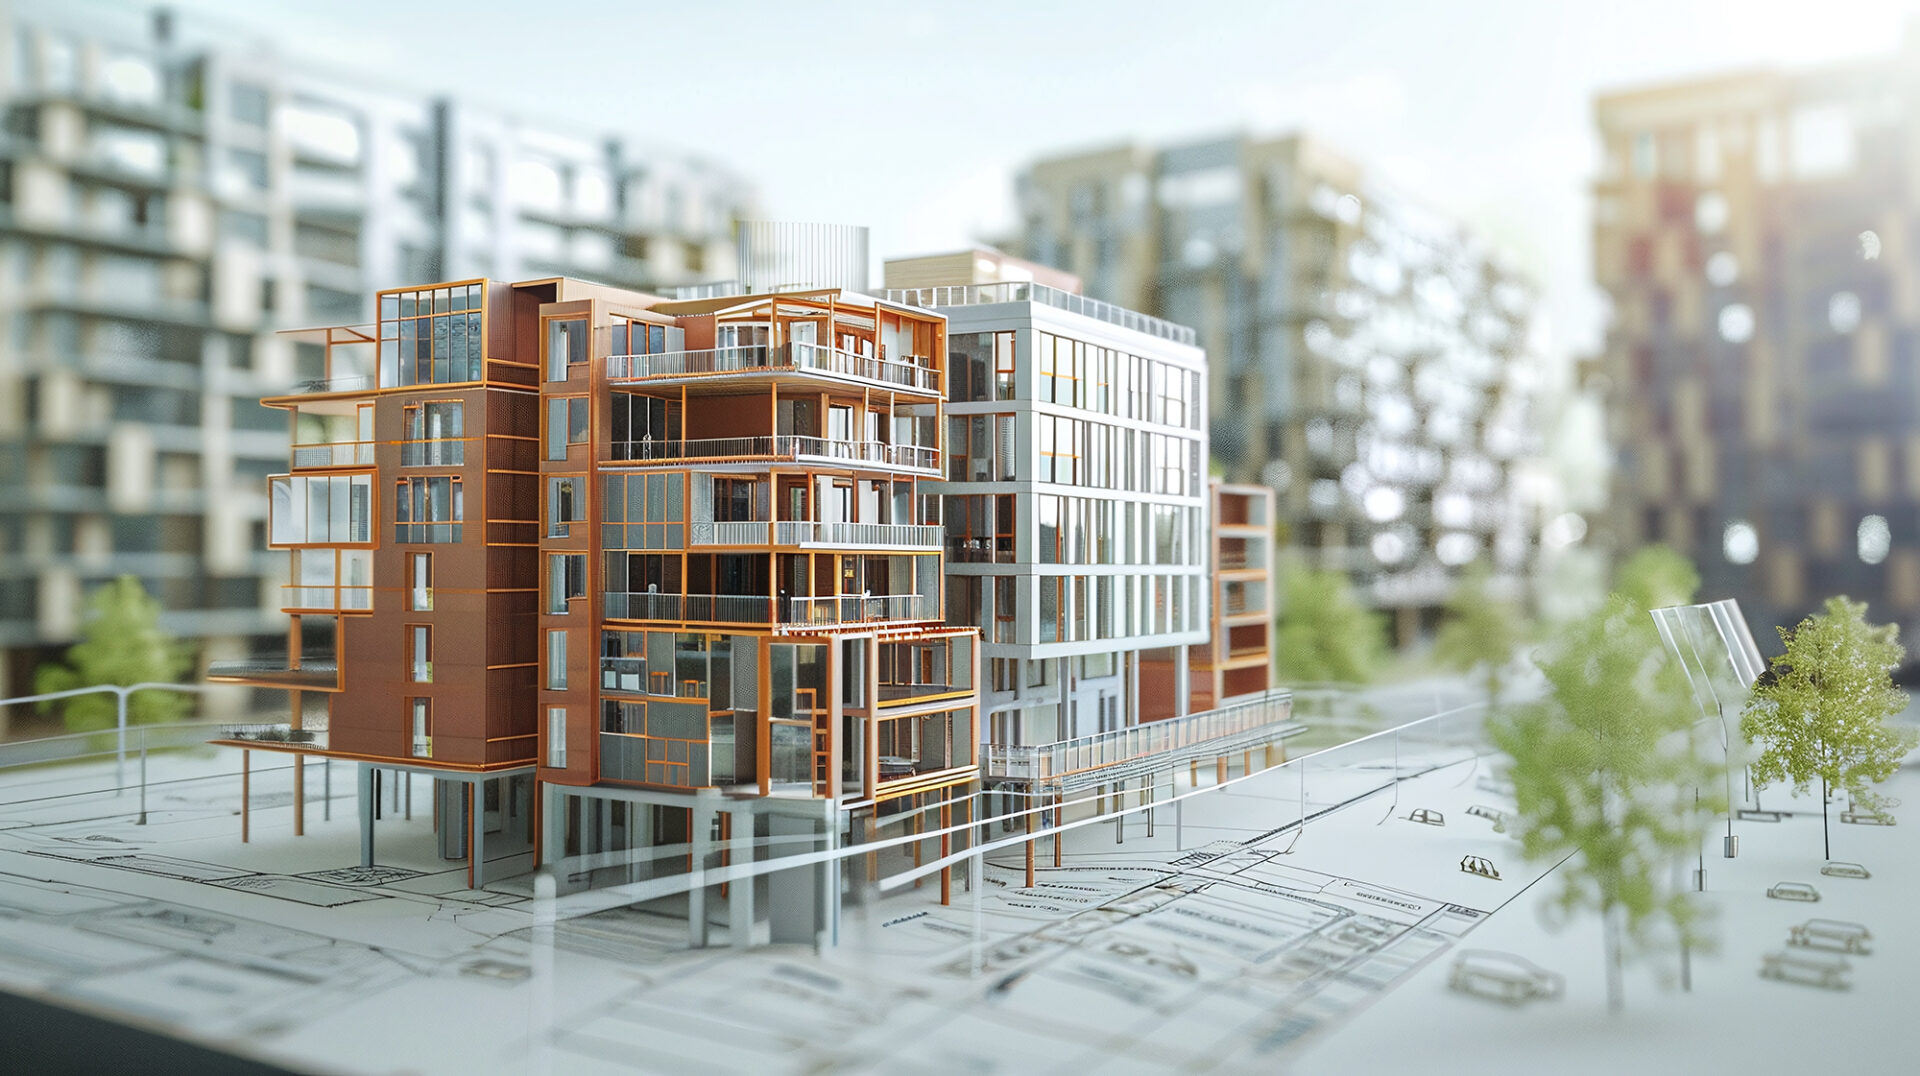 Design and Environmental Sustainability: The 7D Iin the world of BIM